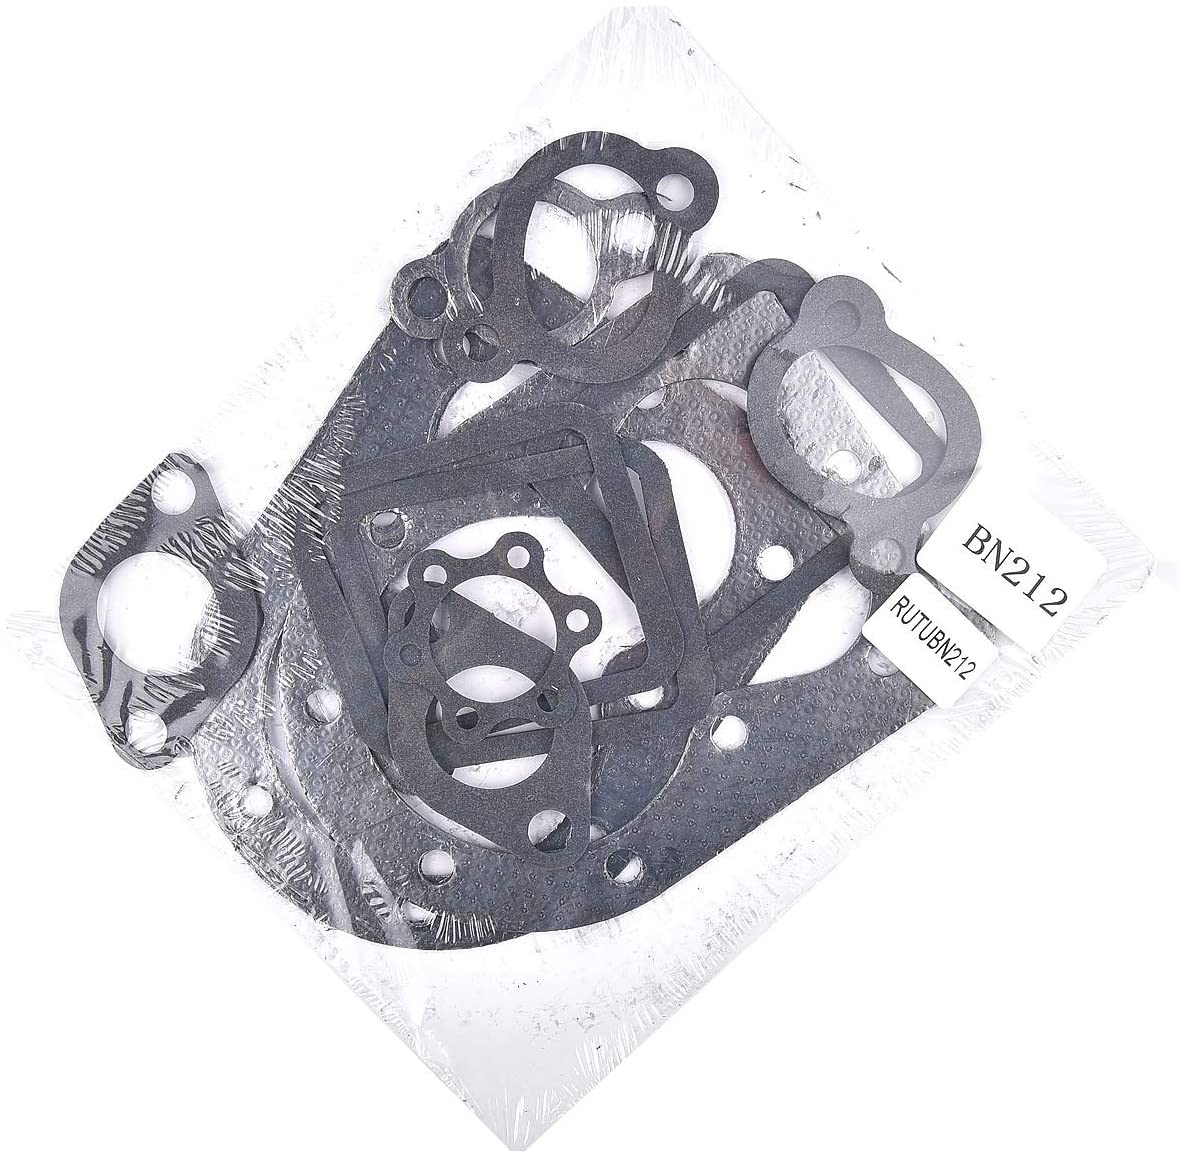 New Valve Grind Head Gasket Kit replacement for BF-B43-48 P216 P218 P220 Engine Replaces 110-3181 1103181